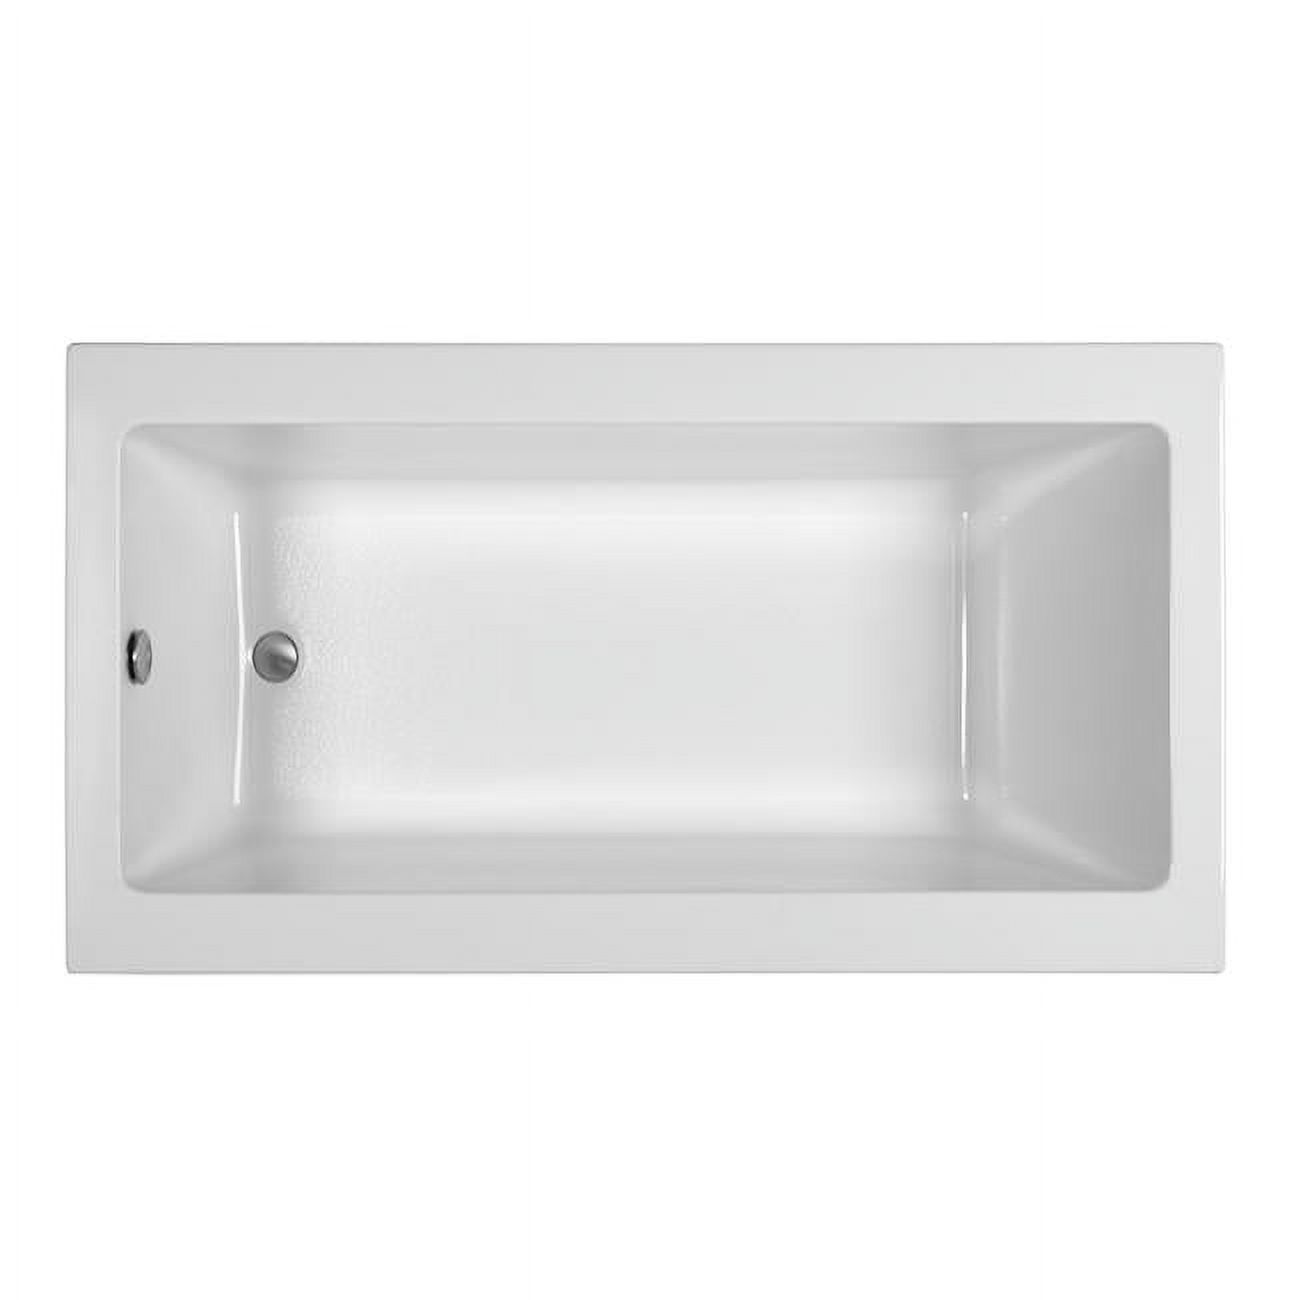 End Drain Freestanding Soaking Tub Virtual Spout, Biscuit - image 1 of 1